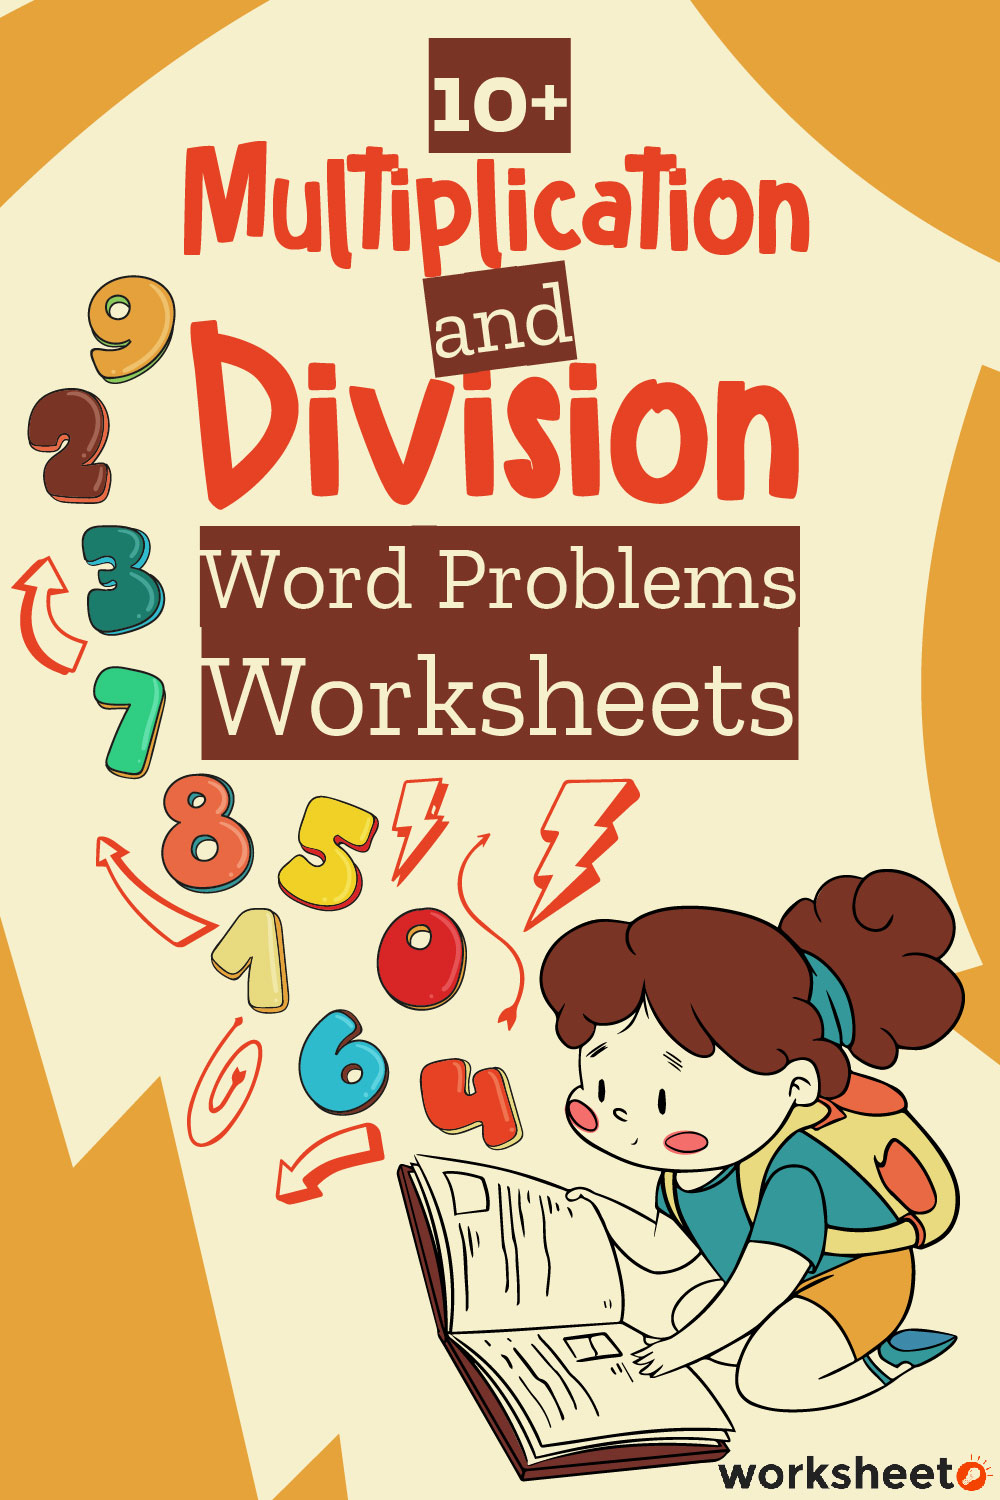 16 Images of Multiplication And Division Word Problems Worksheets